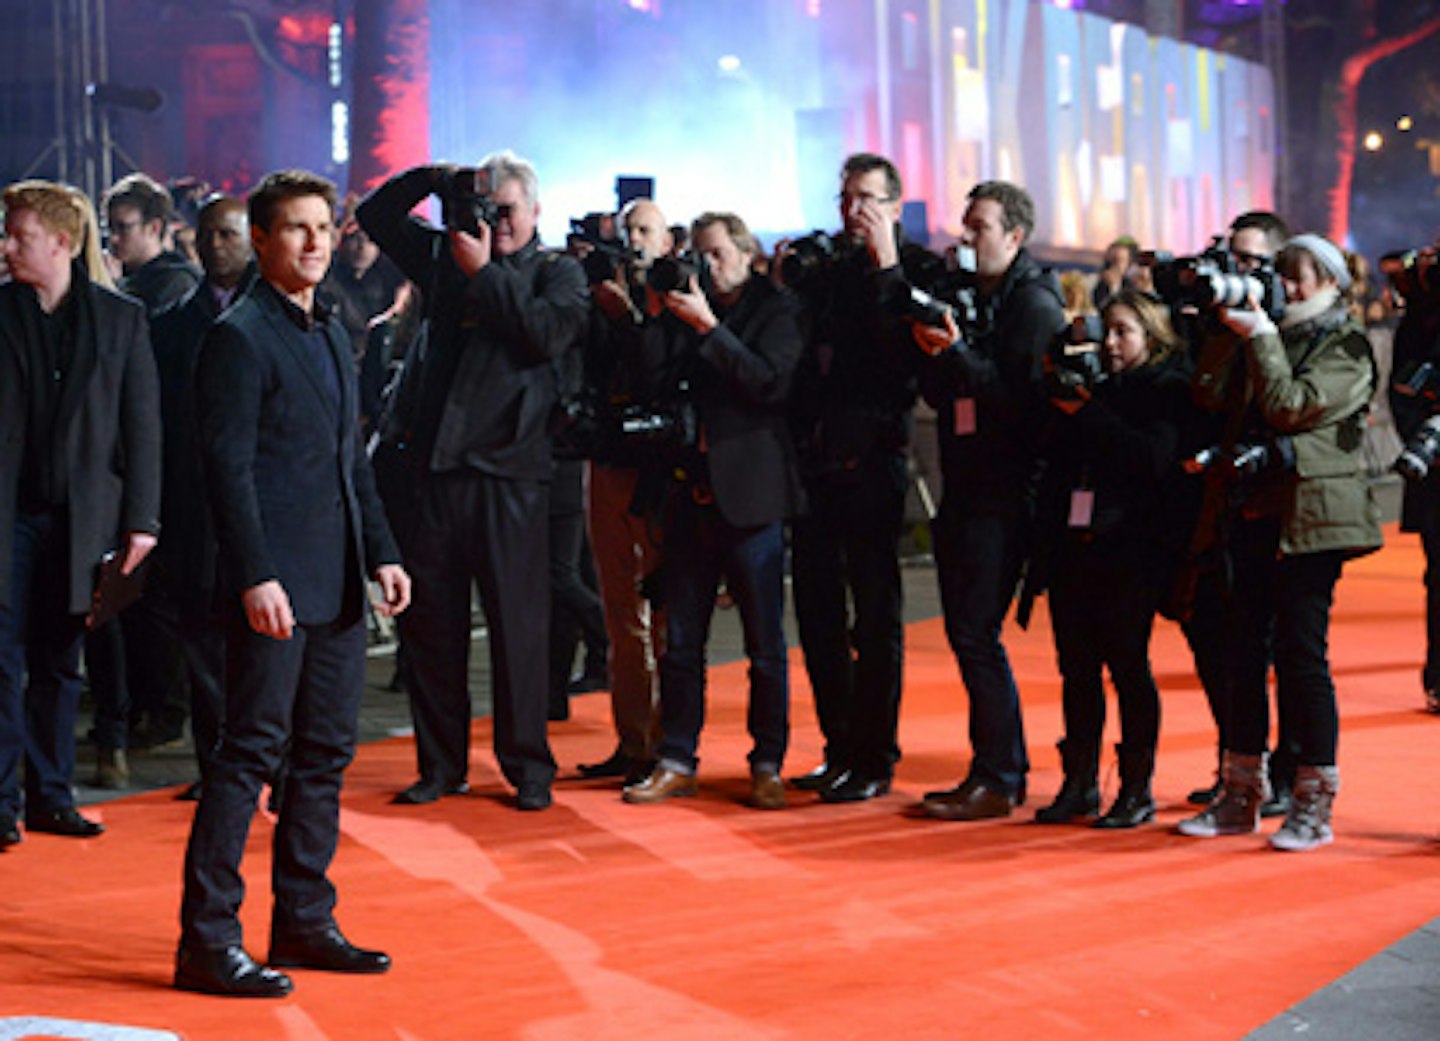 Tom Cruise at the London premiere of Jack Reacher